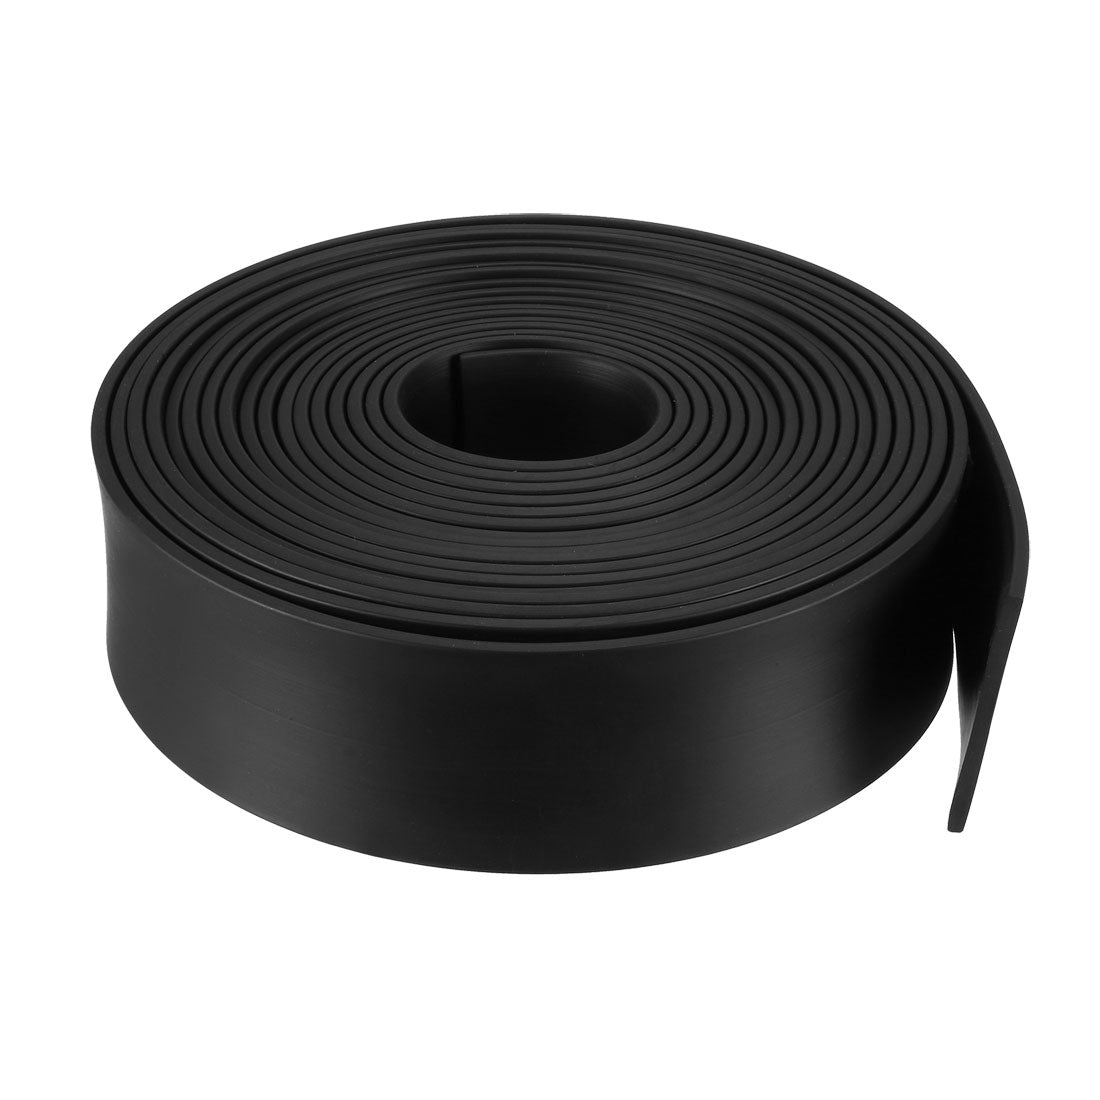 uxcell Uxcell Solid Rectangle Rubber Seal Strip 15mm Wide 5mm Thick, 3 Meters Long Black